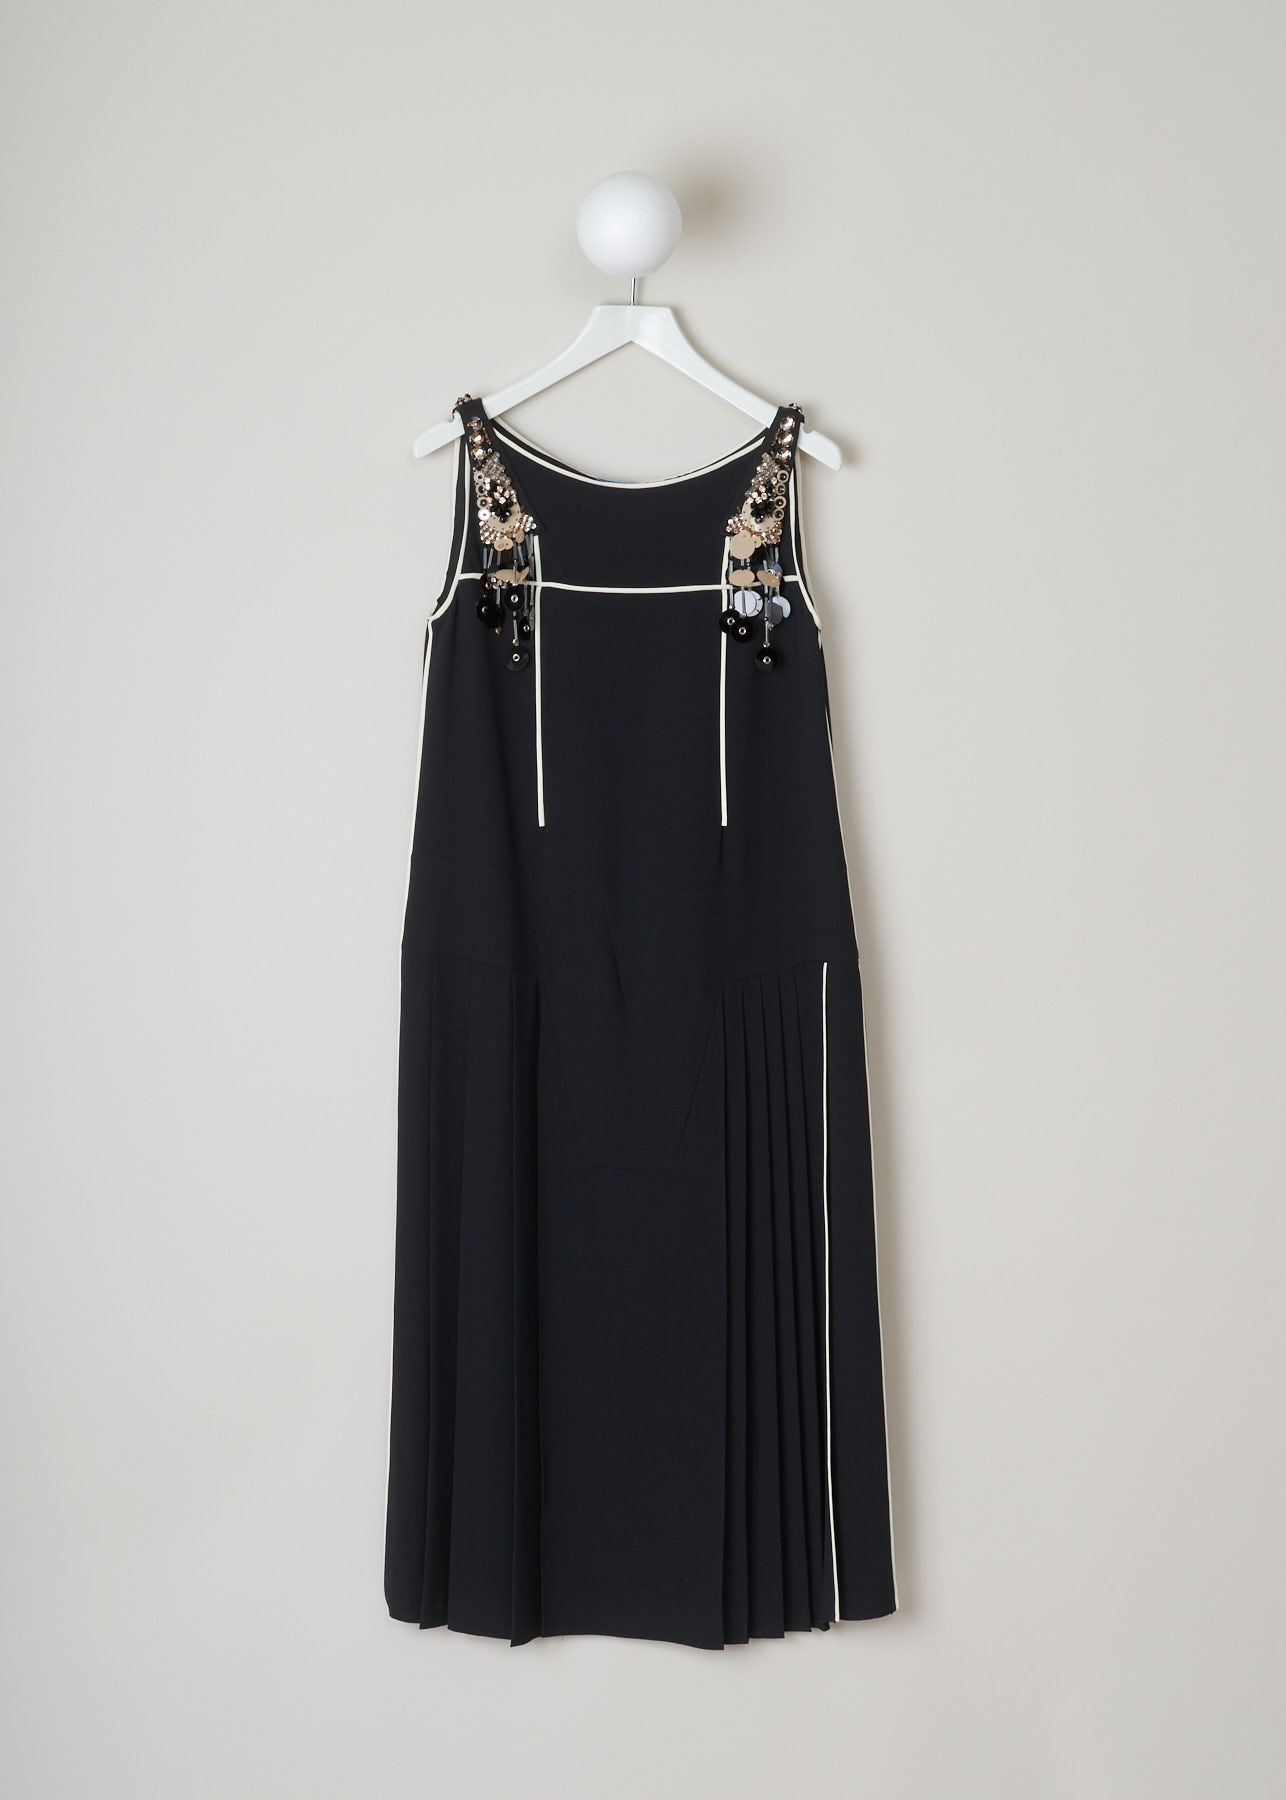 Prada, black beaded and sequined dress, SablePipingR_P33F7R_F0SJ2_NeroAvorioGRI, black, front, black dress trimmed in white. beautiful beads,crystals and sequins on the shoulder. concealed zipper on the left side of the dress. pleated skirt which flares out. 